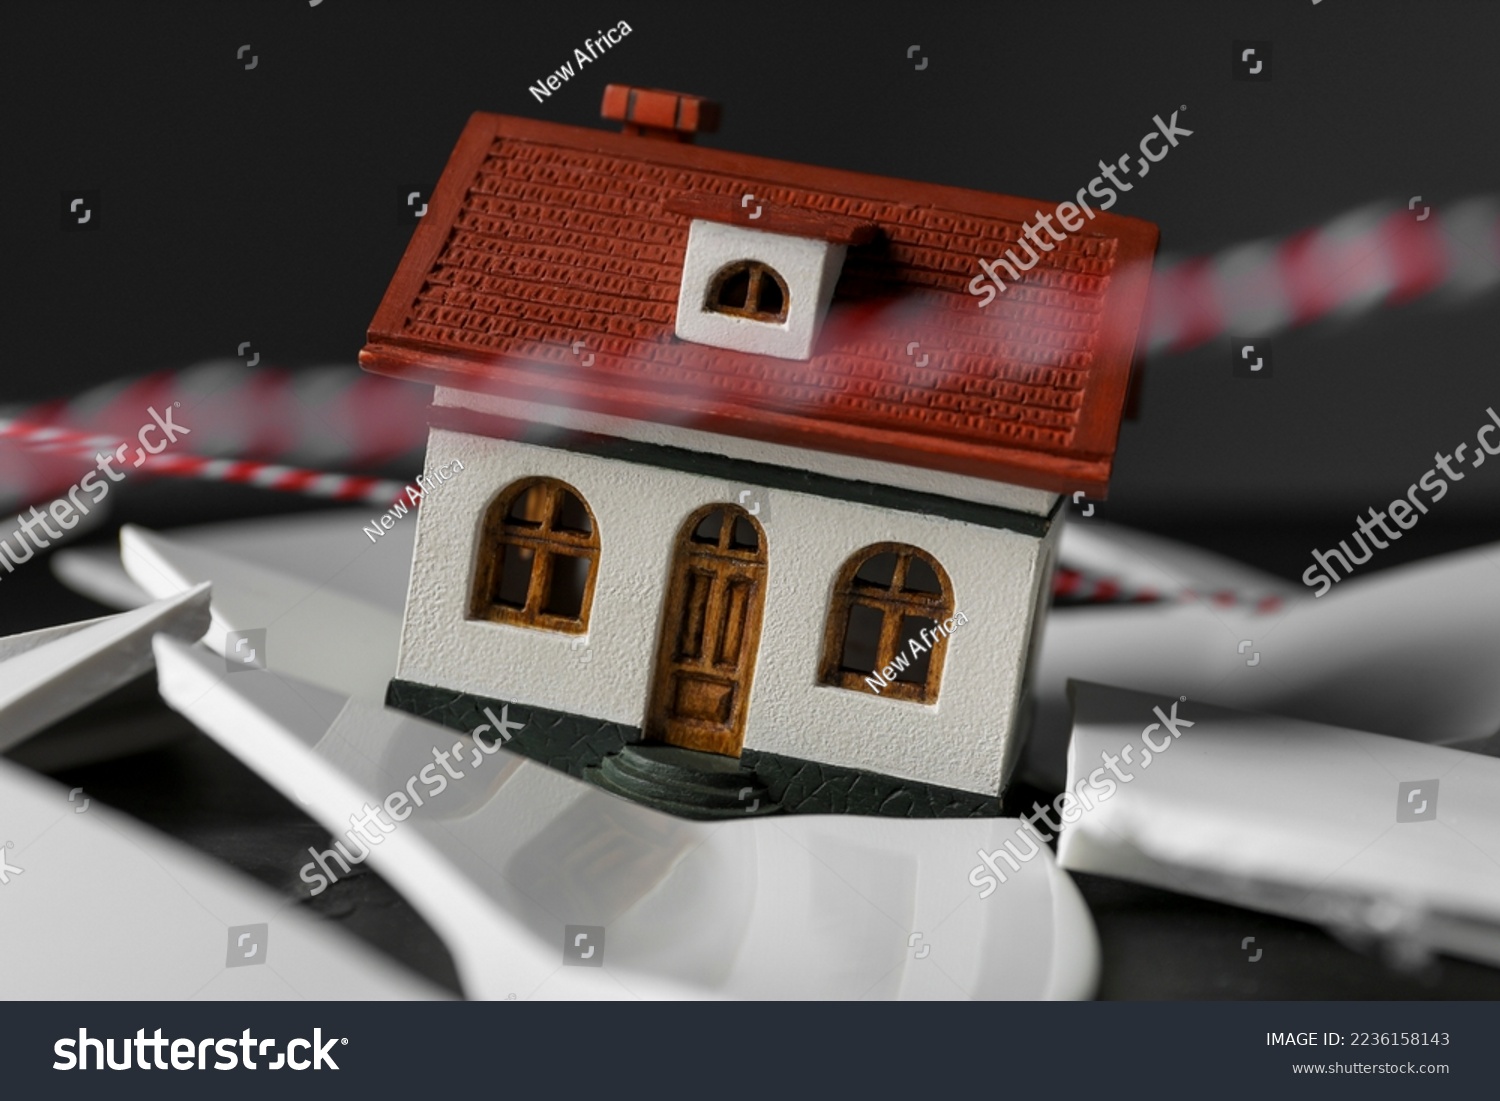 House model and broken dishes on black table depicting destruction after earthquake, closeup #2236158143